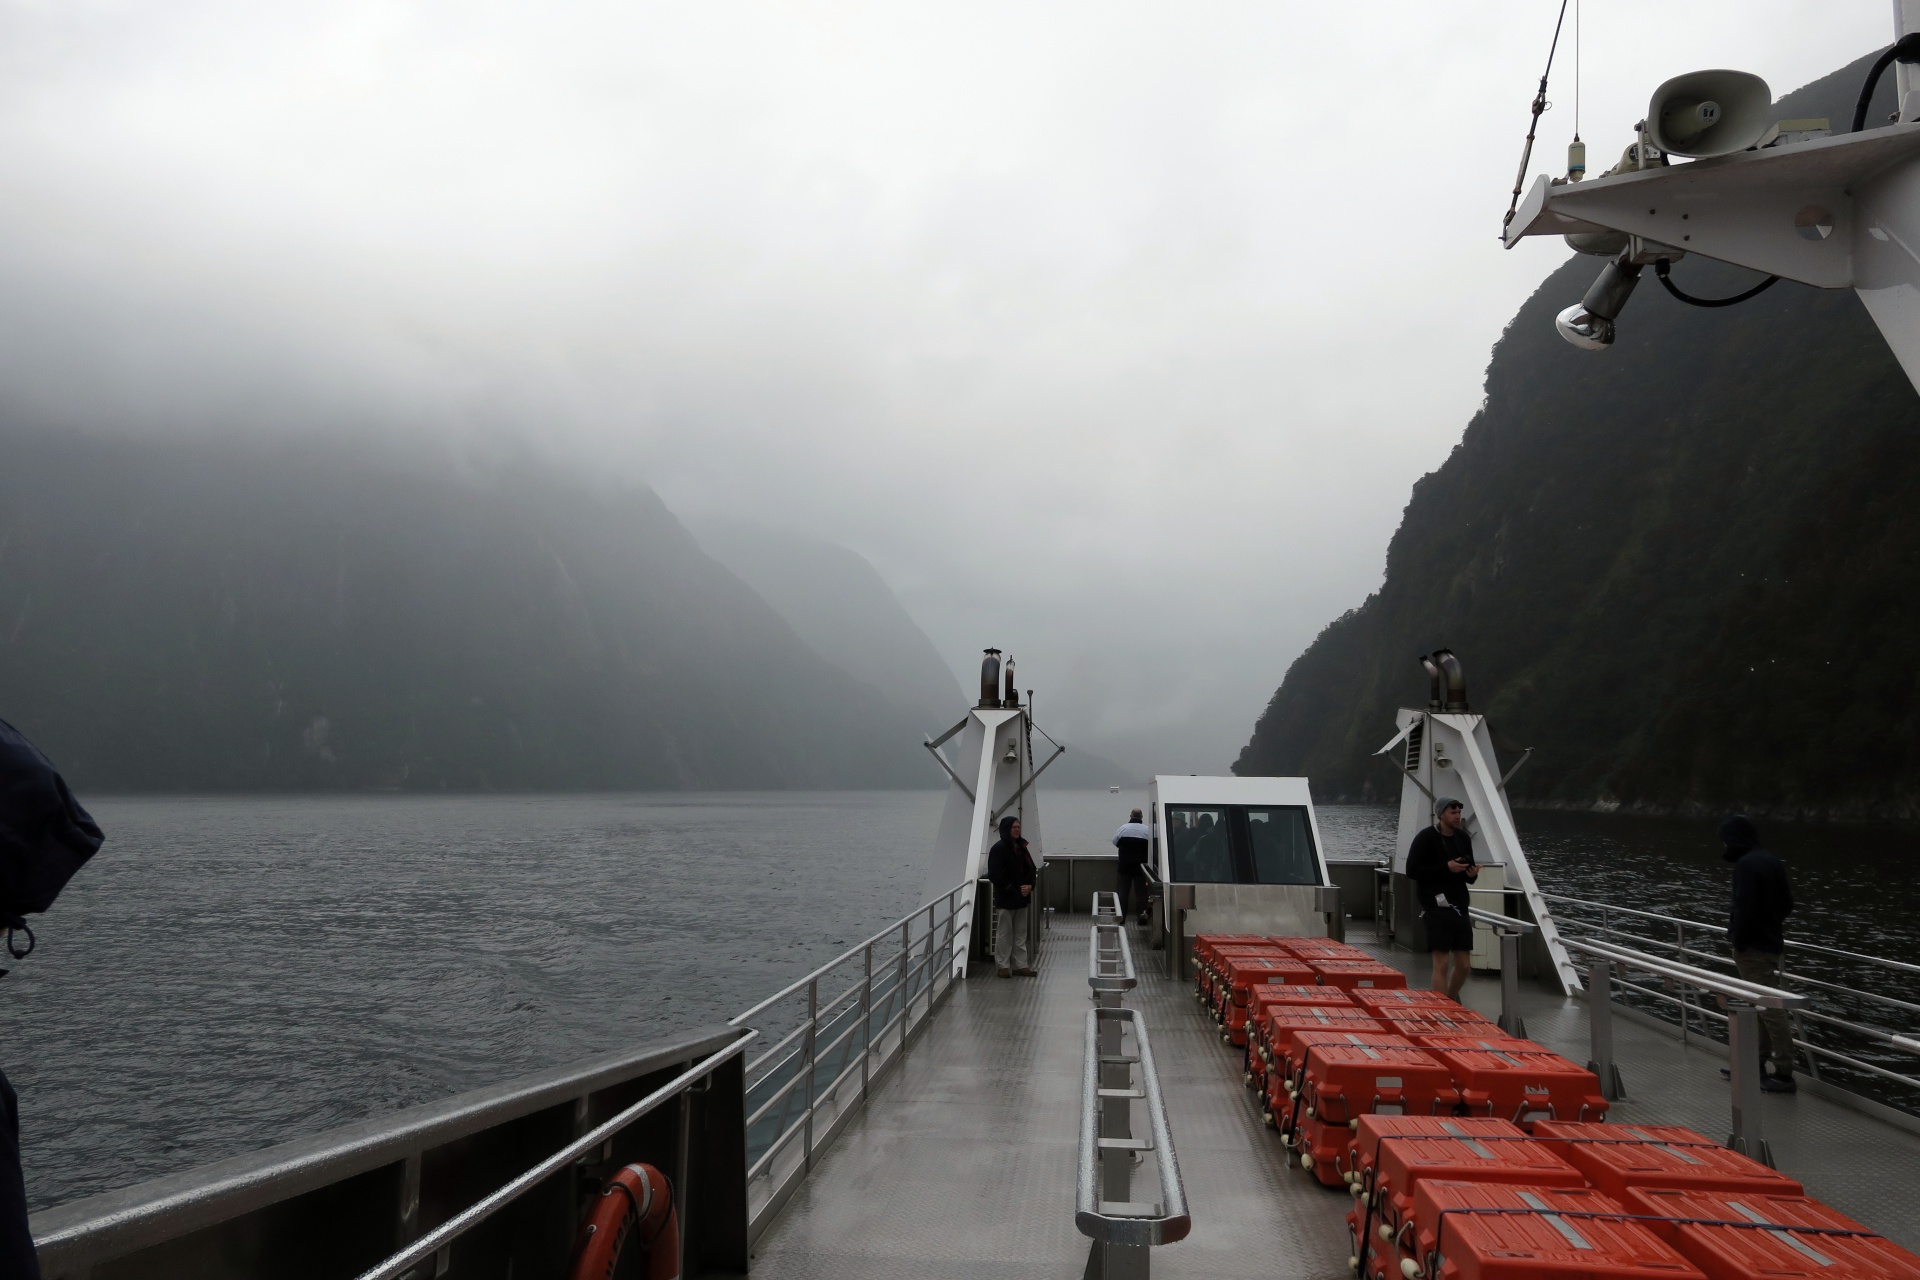 Aboard the Ferry into Milford Sound